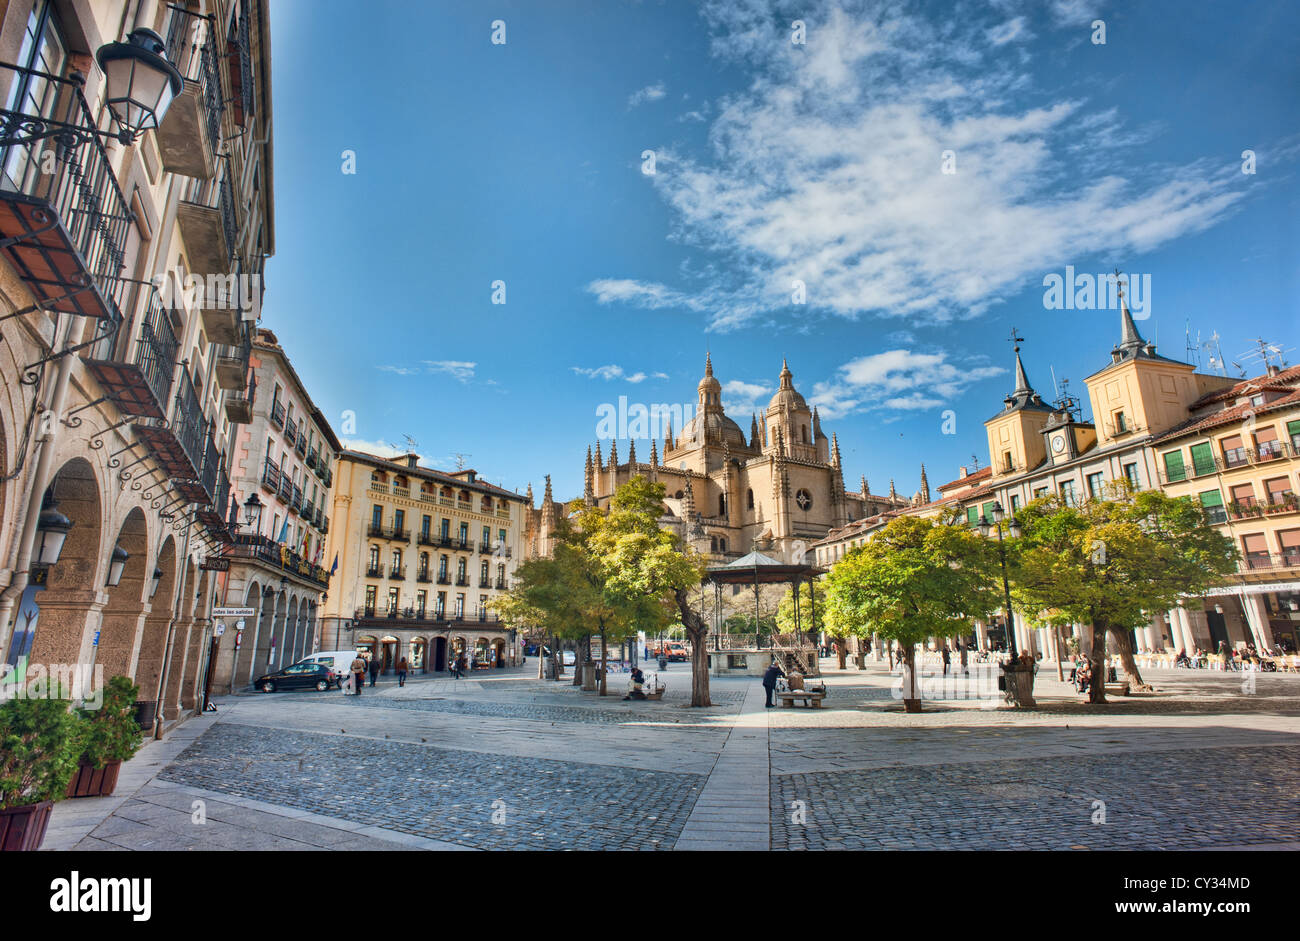 The main square in the old city of Segovia in northern Spain with the Gothic cathedral in the background. Stock Photo